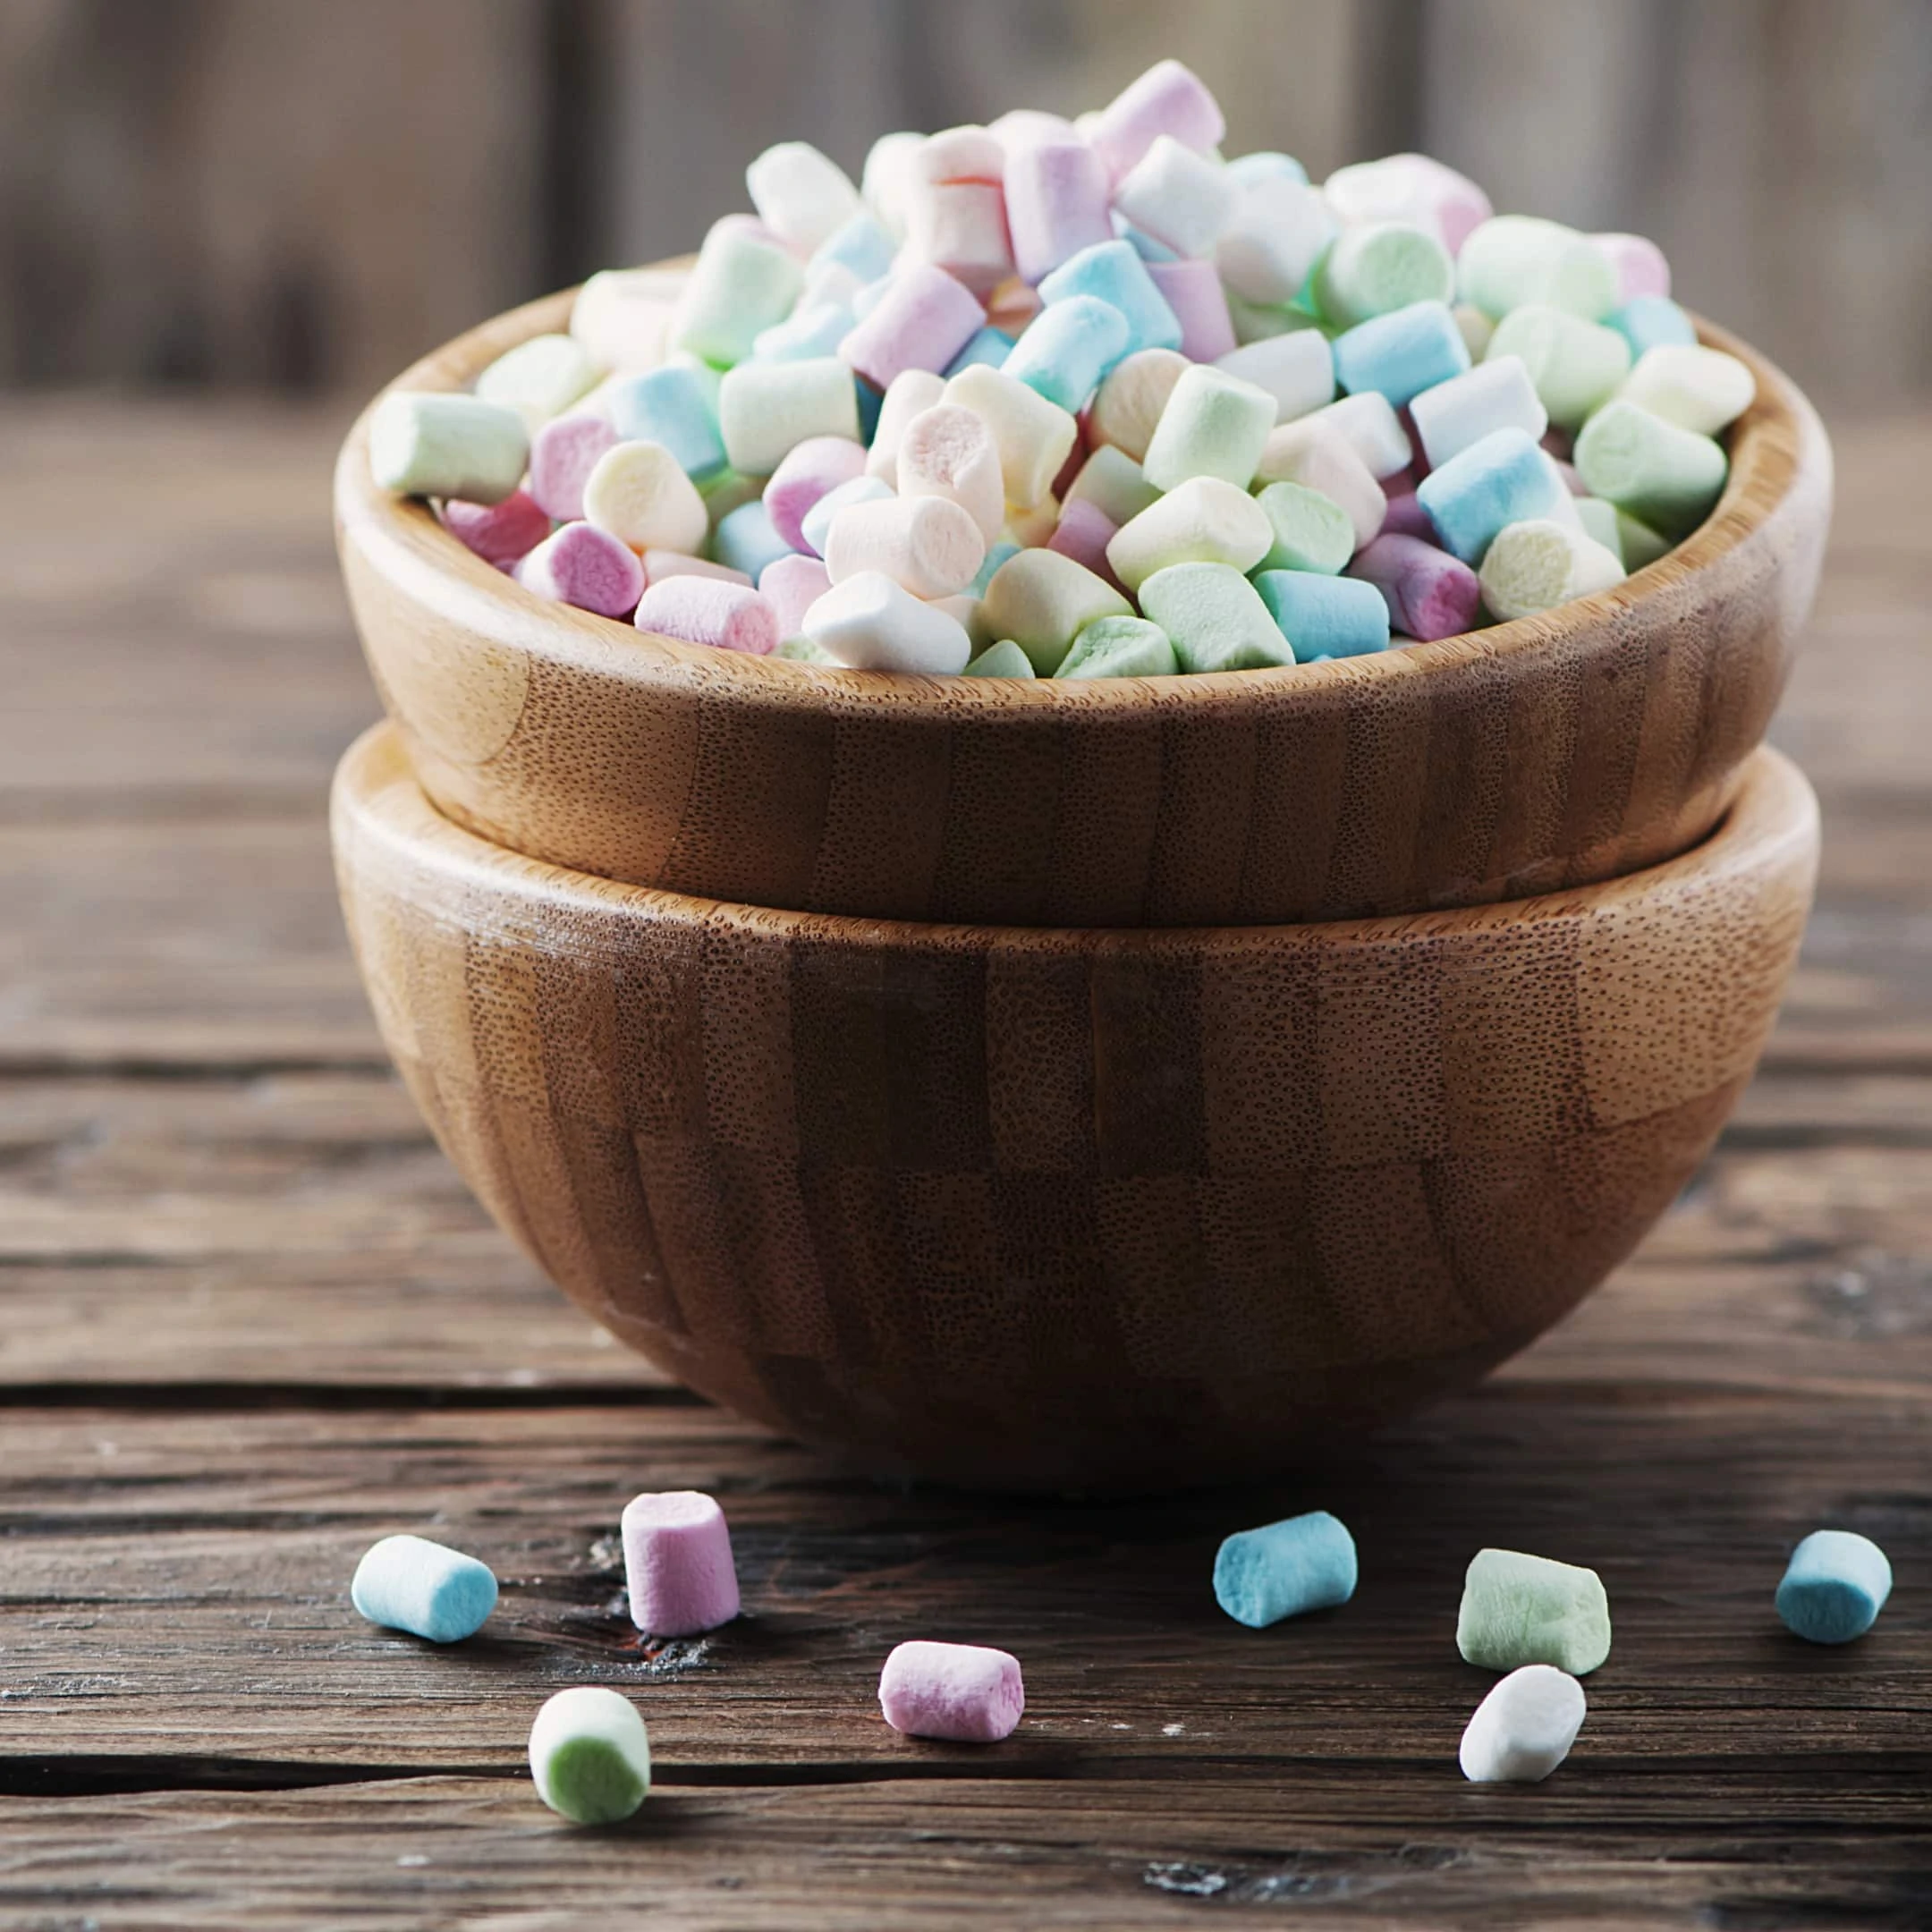 Colored marshmallow in the wooden bowl